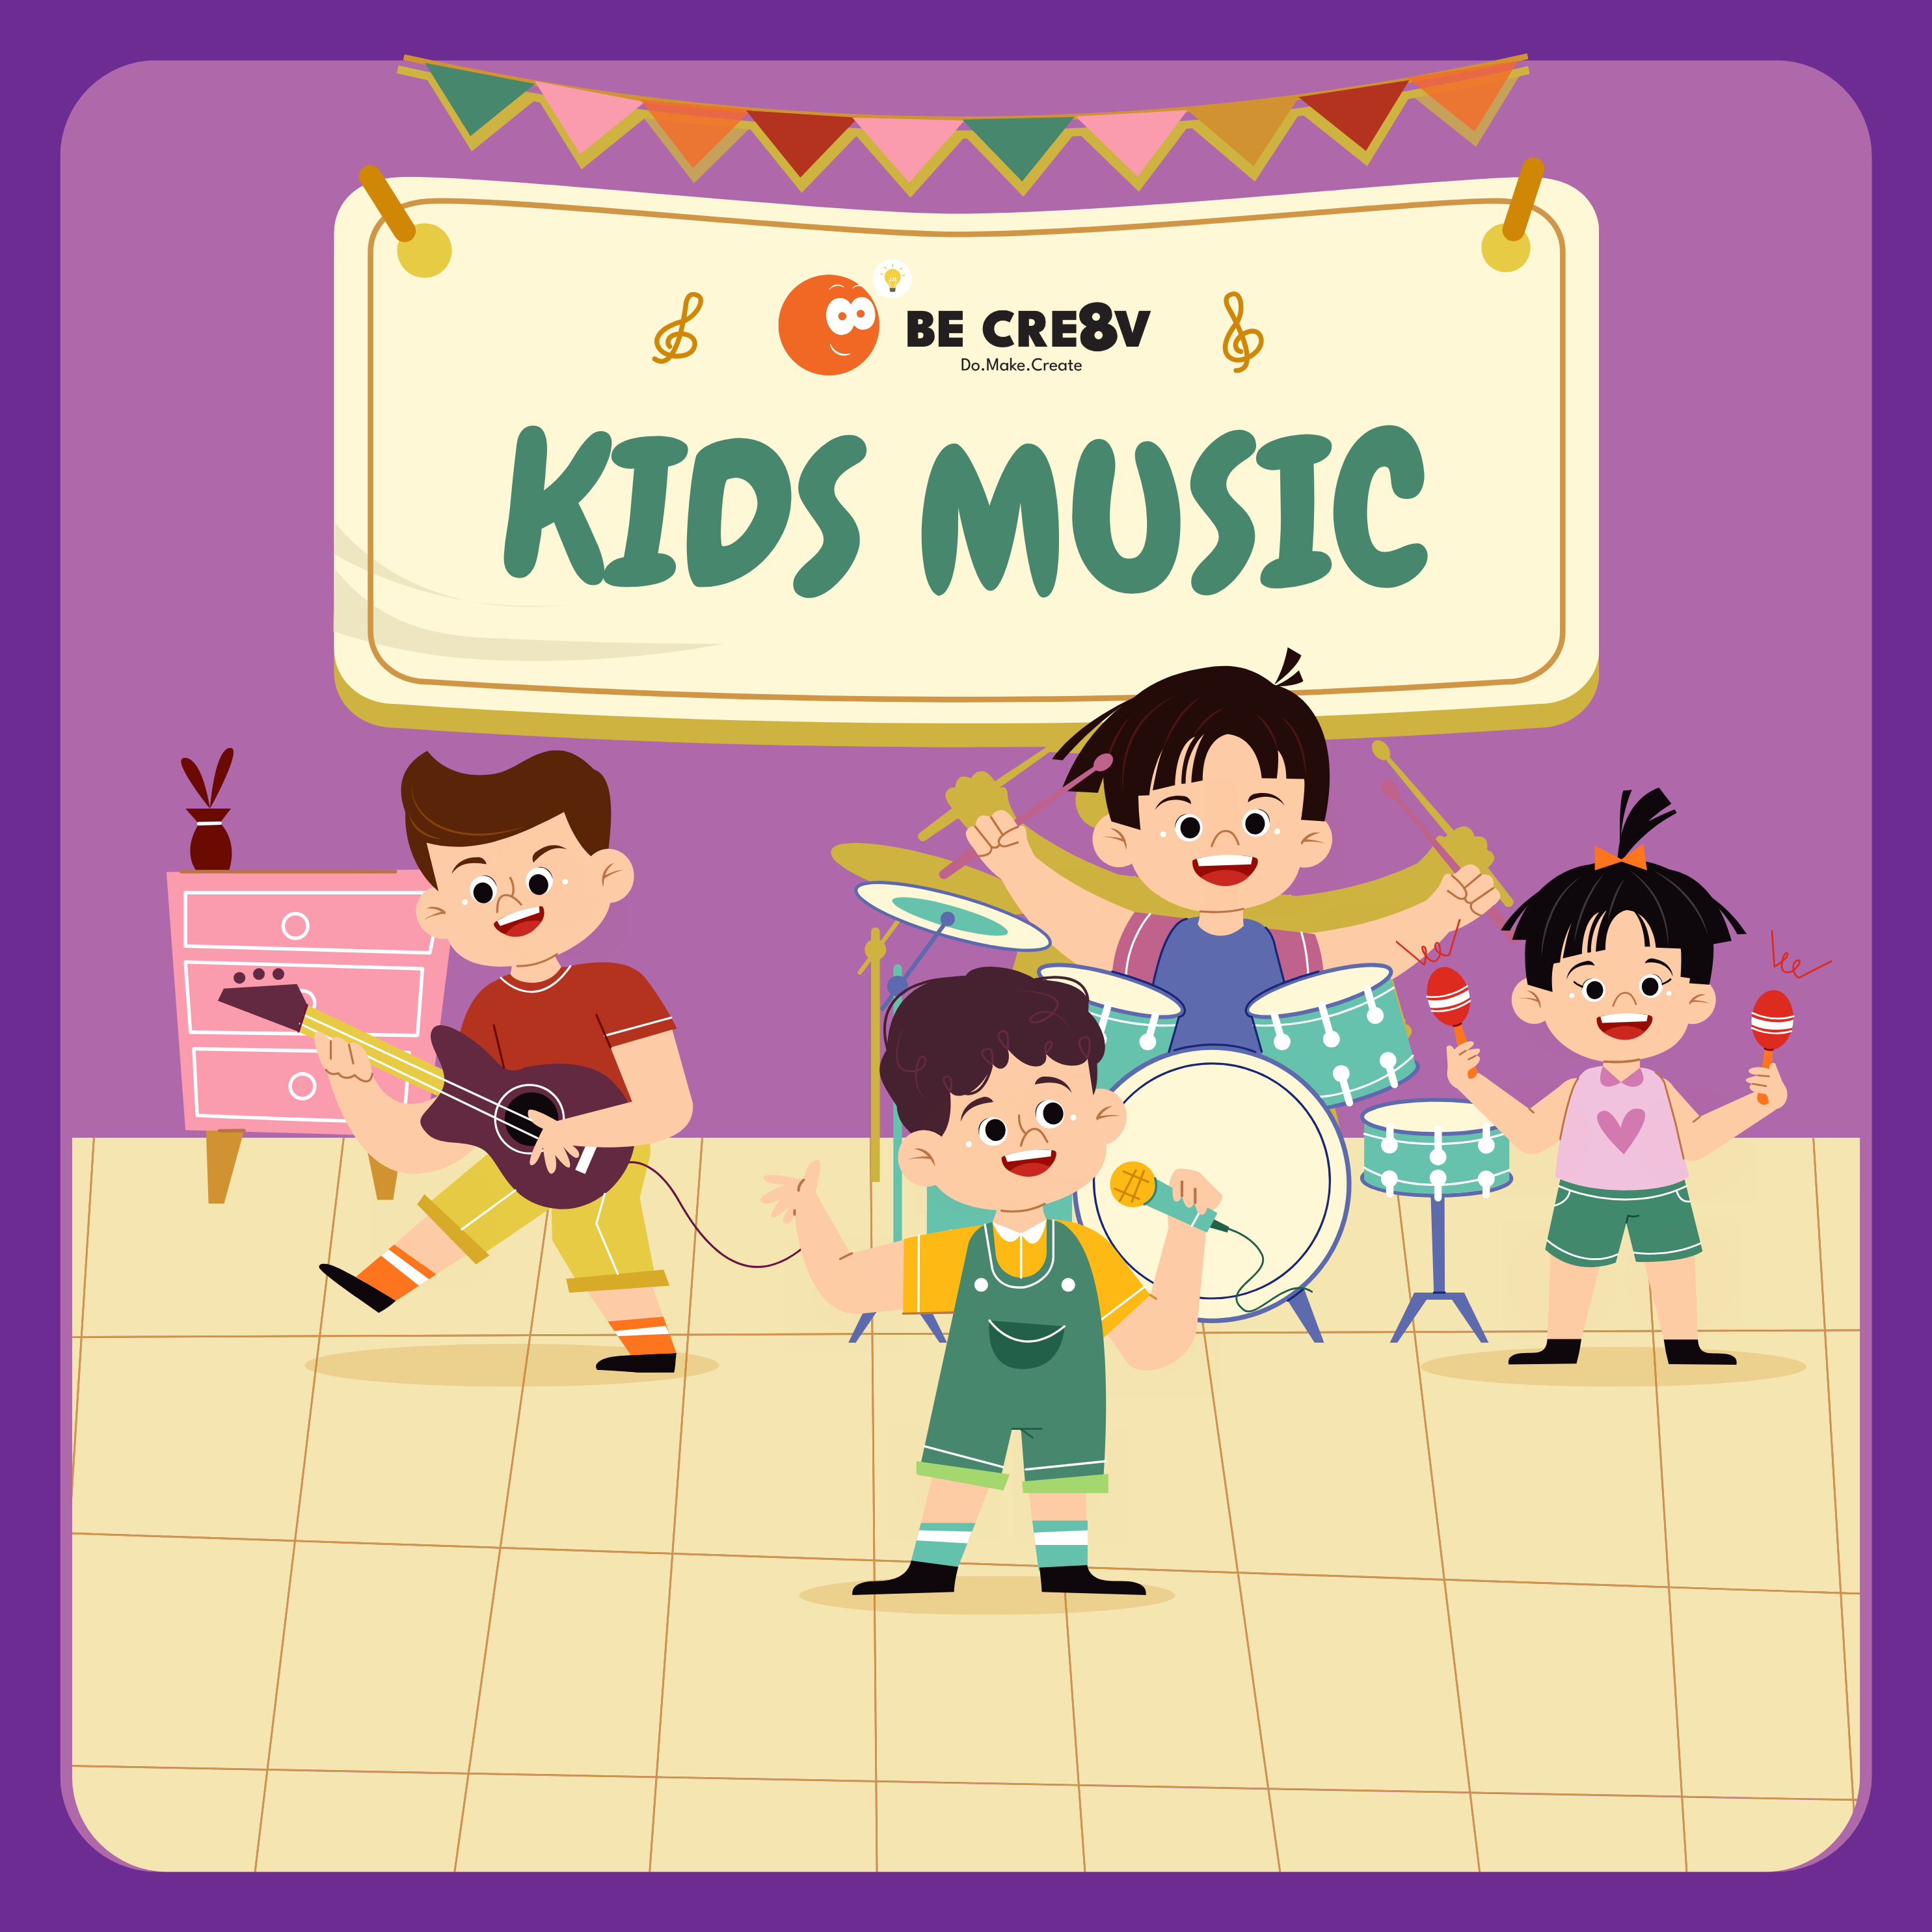 HOW CAN WE INTRODUCE MUSIC TO YOUNG CHILDREN IN A FUN AND PLAYFUL WAY?